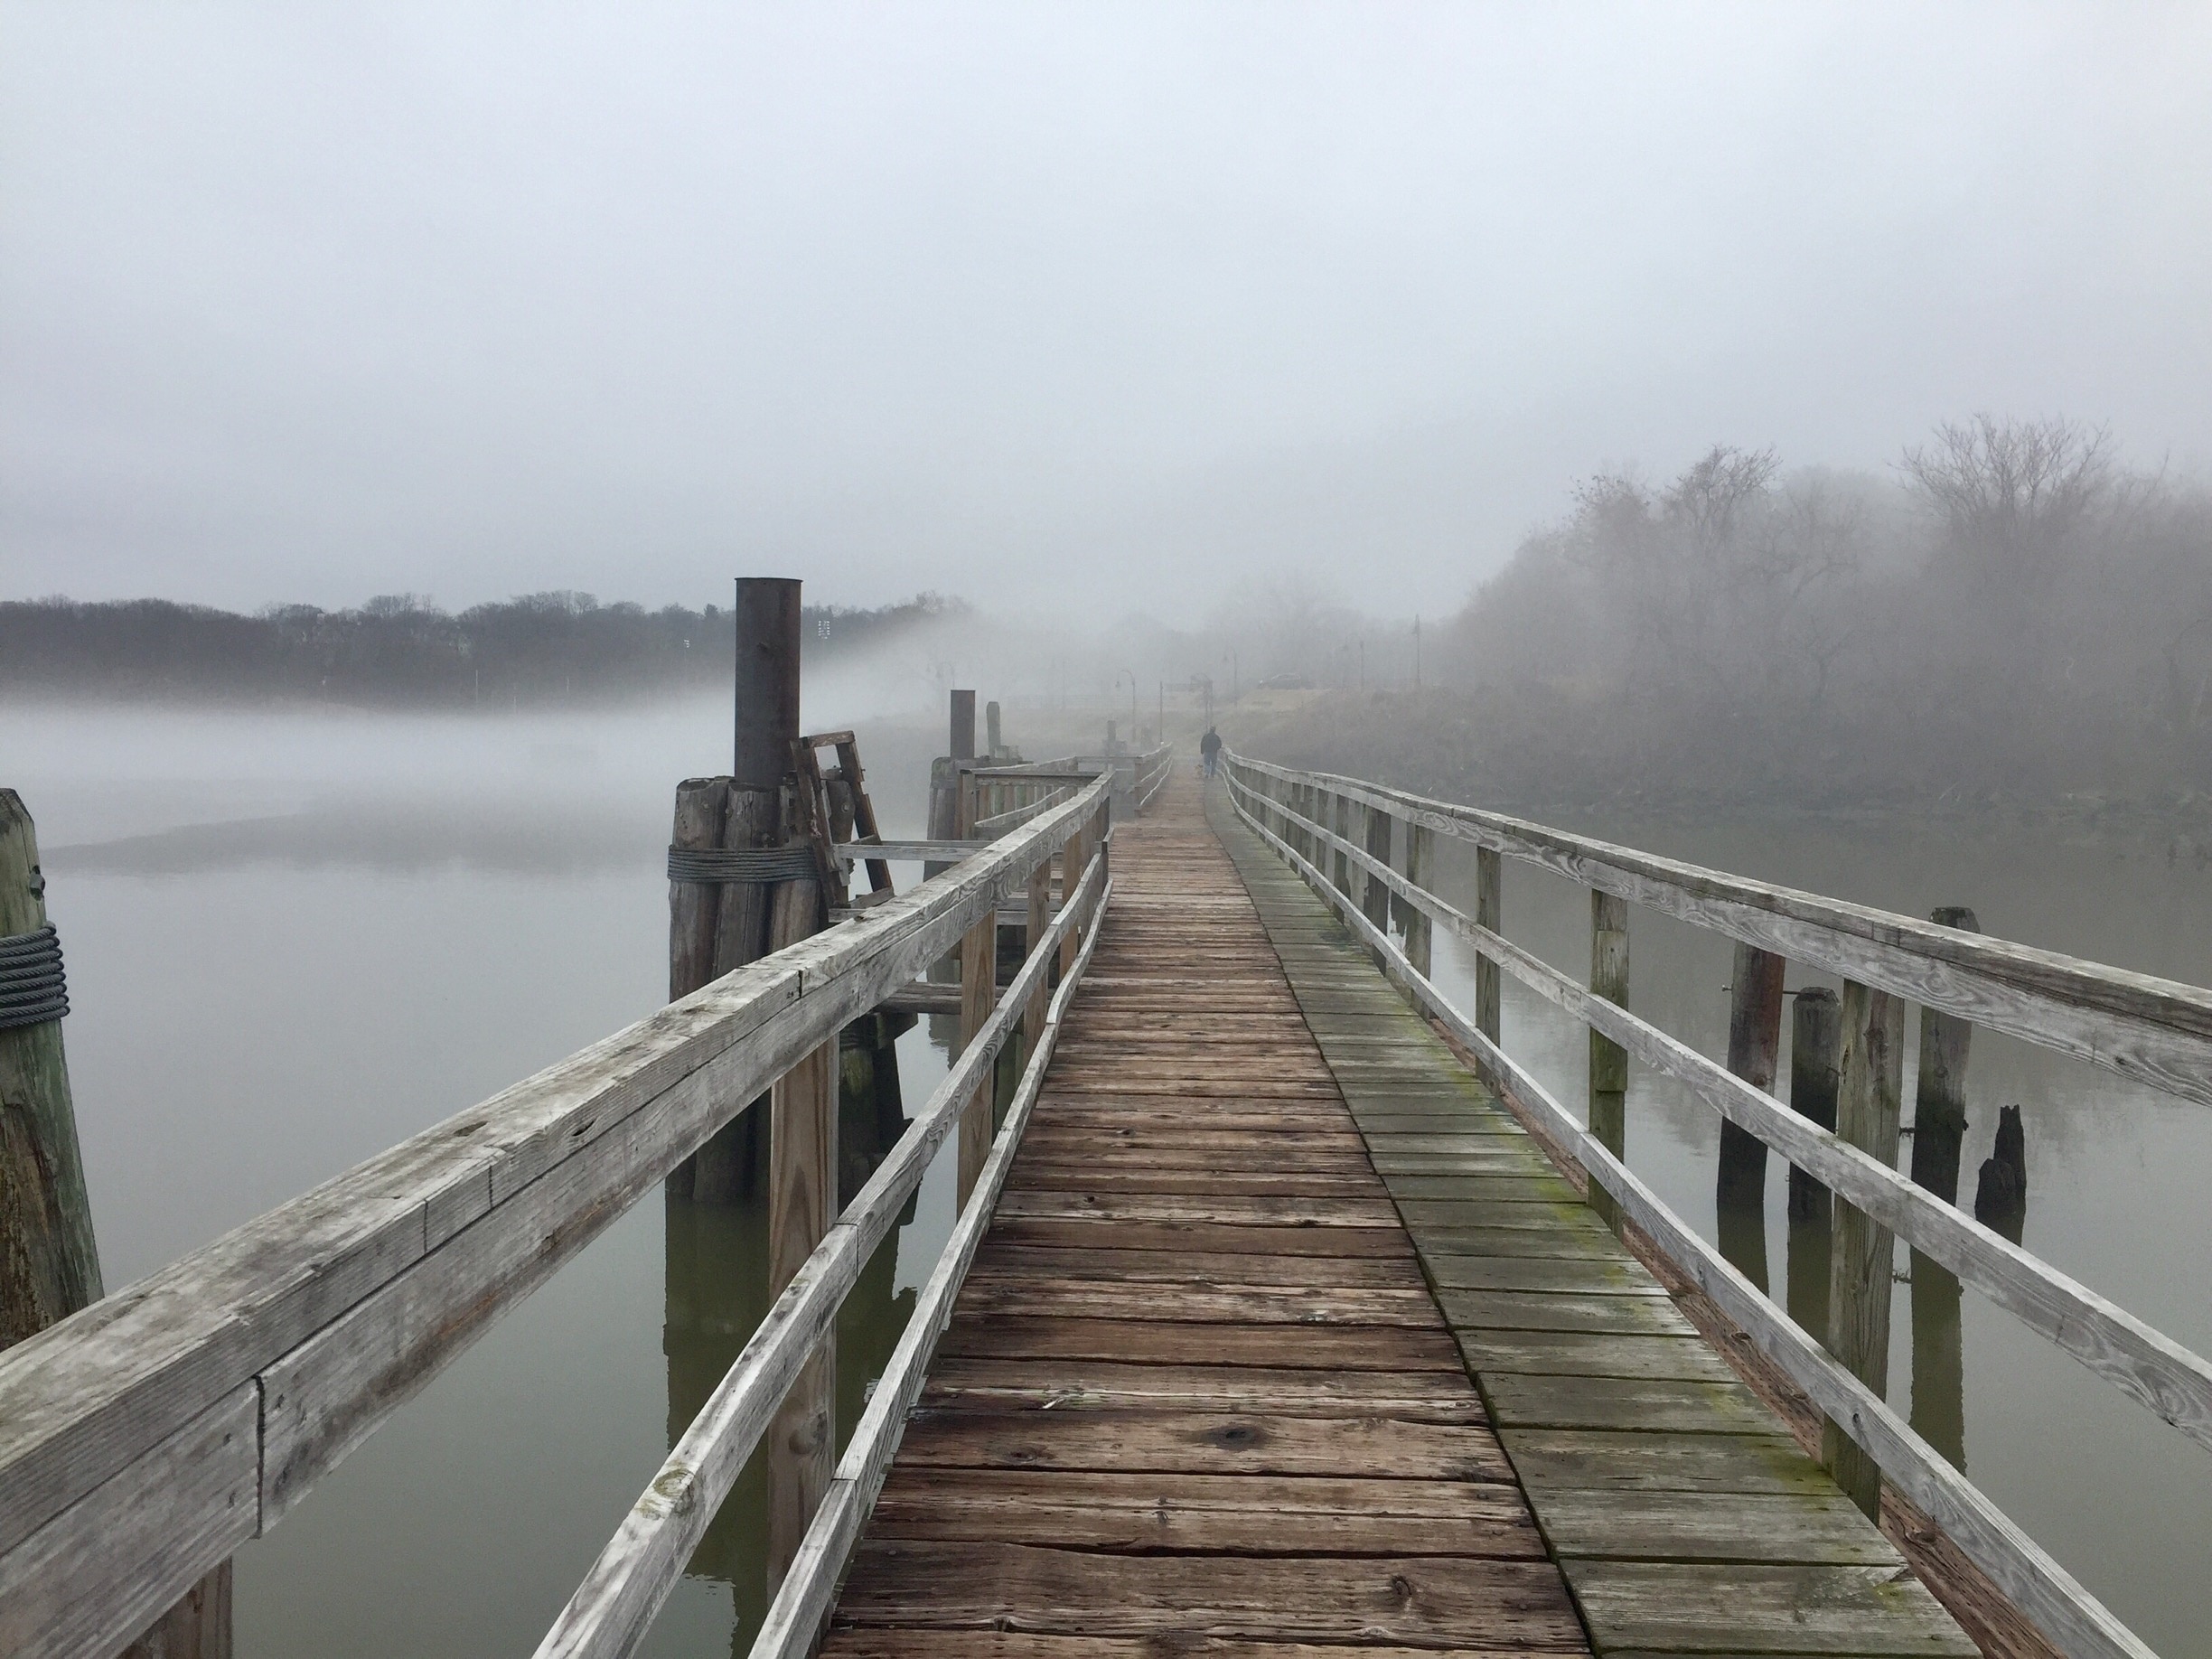 Spent a foggy morning looking for bald eagles. Did not see any but enjoyed the walk. 